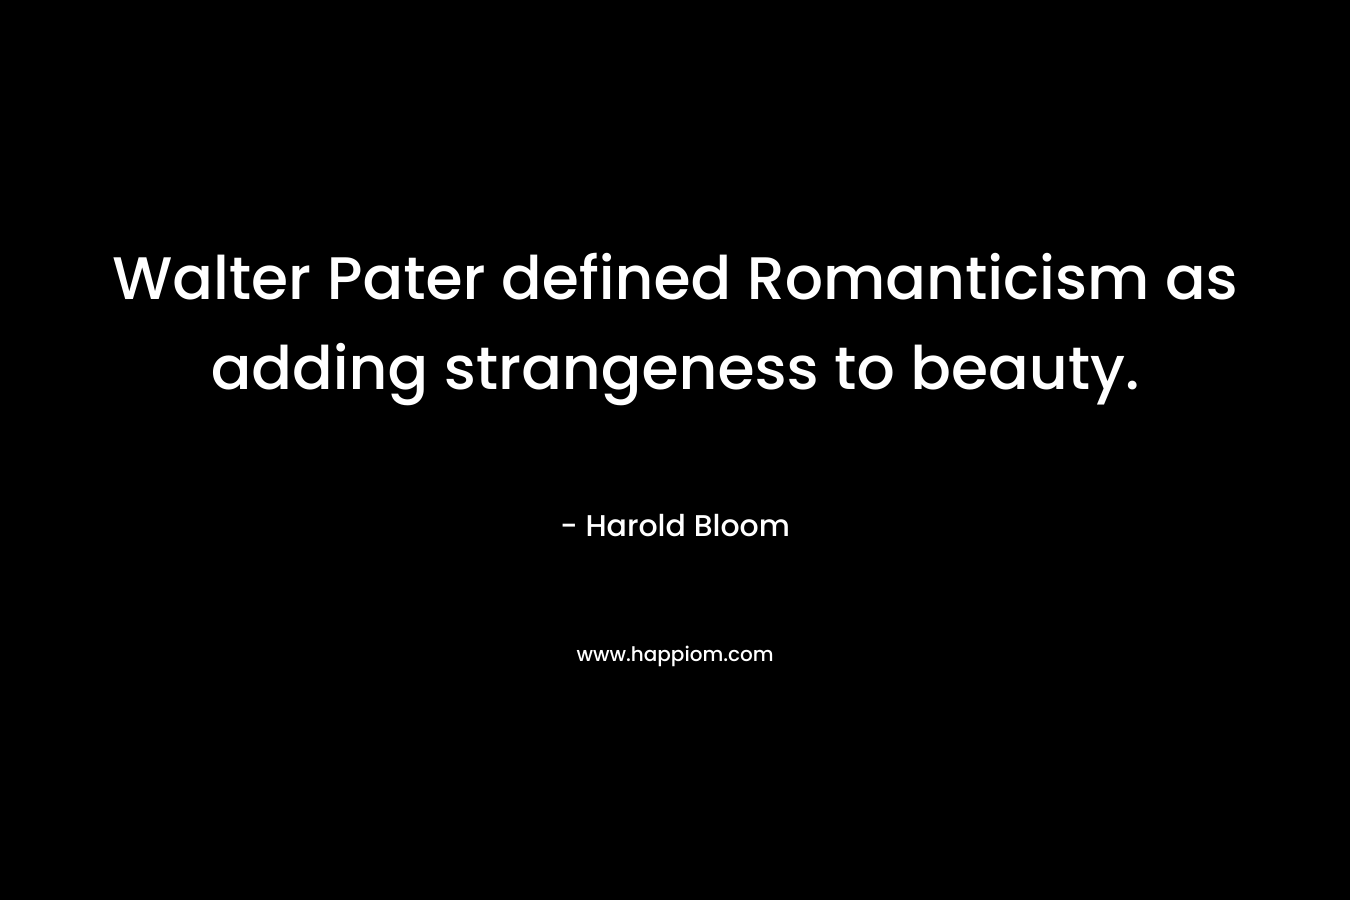 Walter Pater defined Romanticism as adding strangeness to beauty. – Harold Bloom